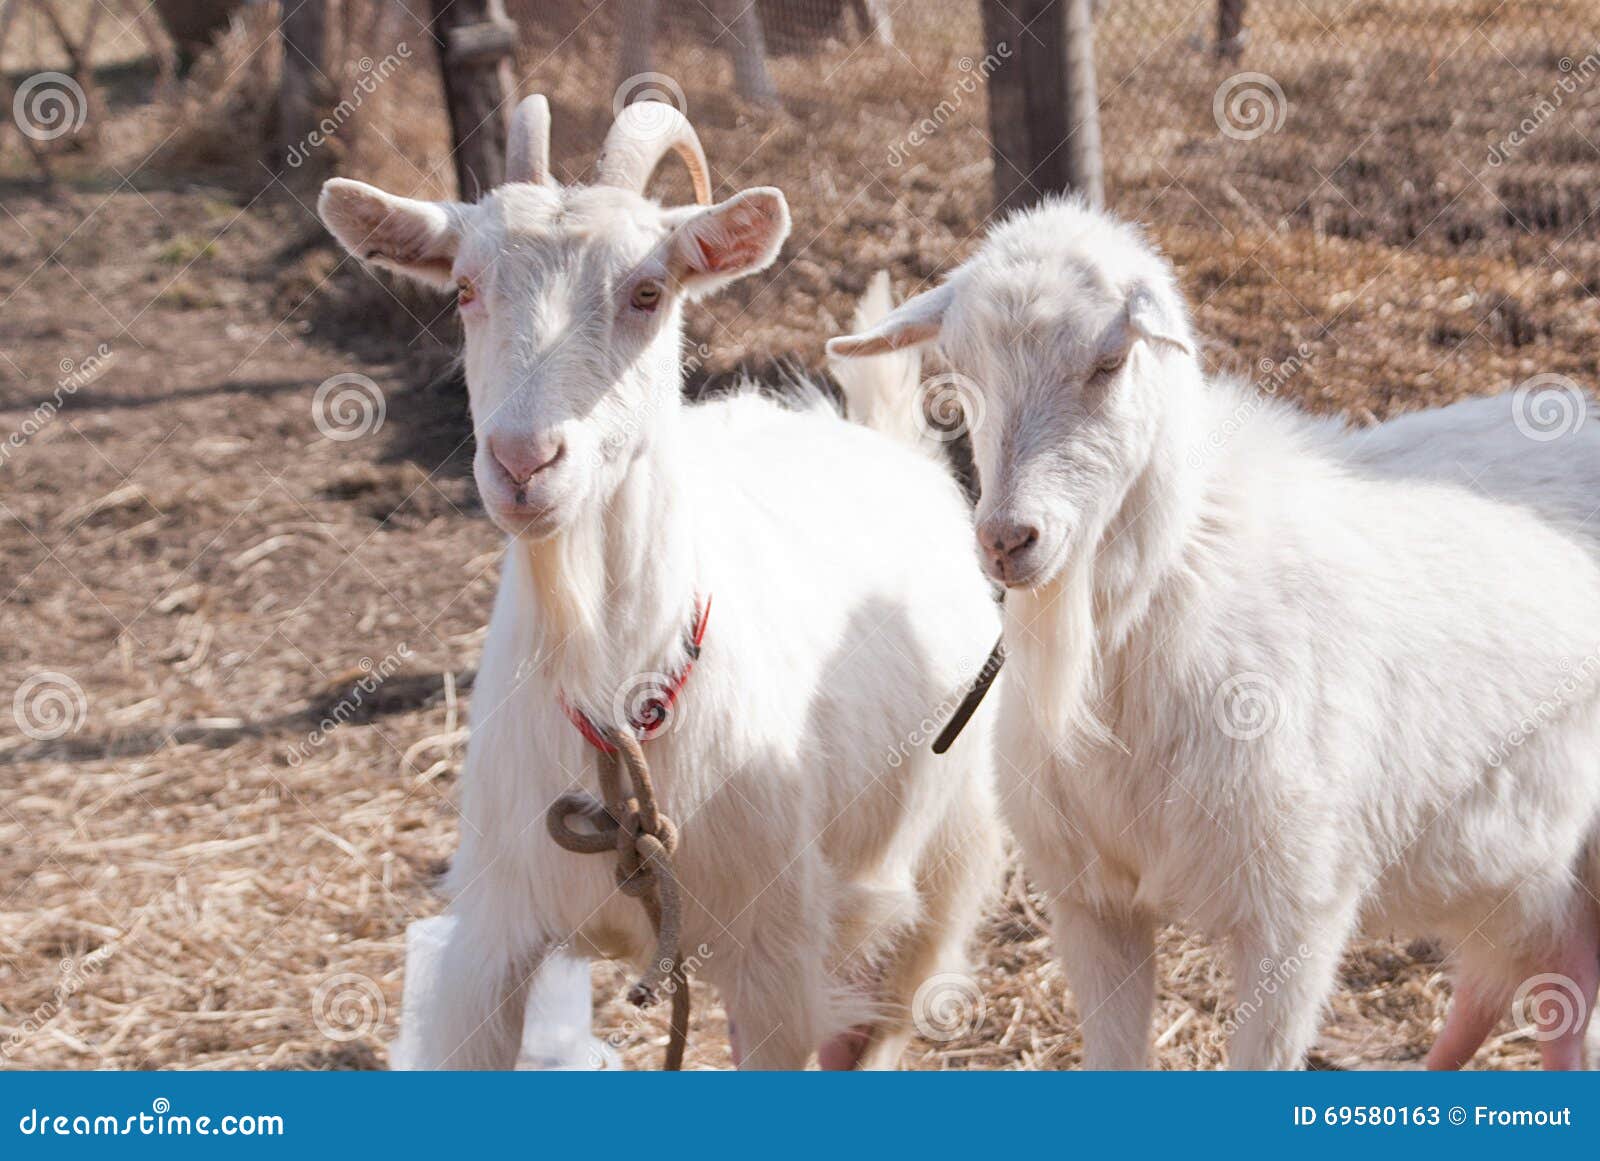 https://thumbs.dreamstime.com/z/two-old-goats-standing-together-69580163.jpg